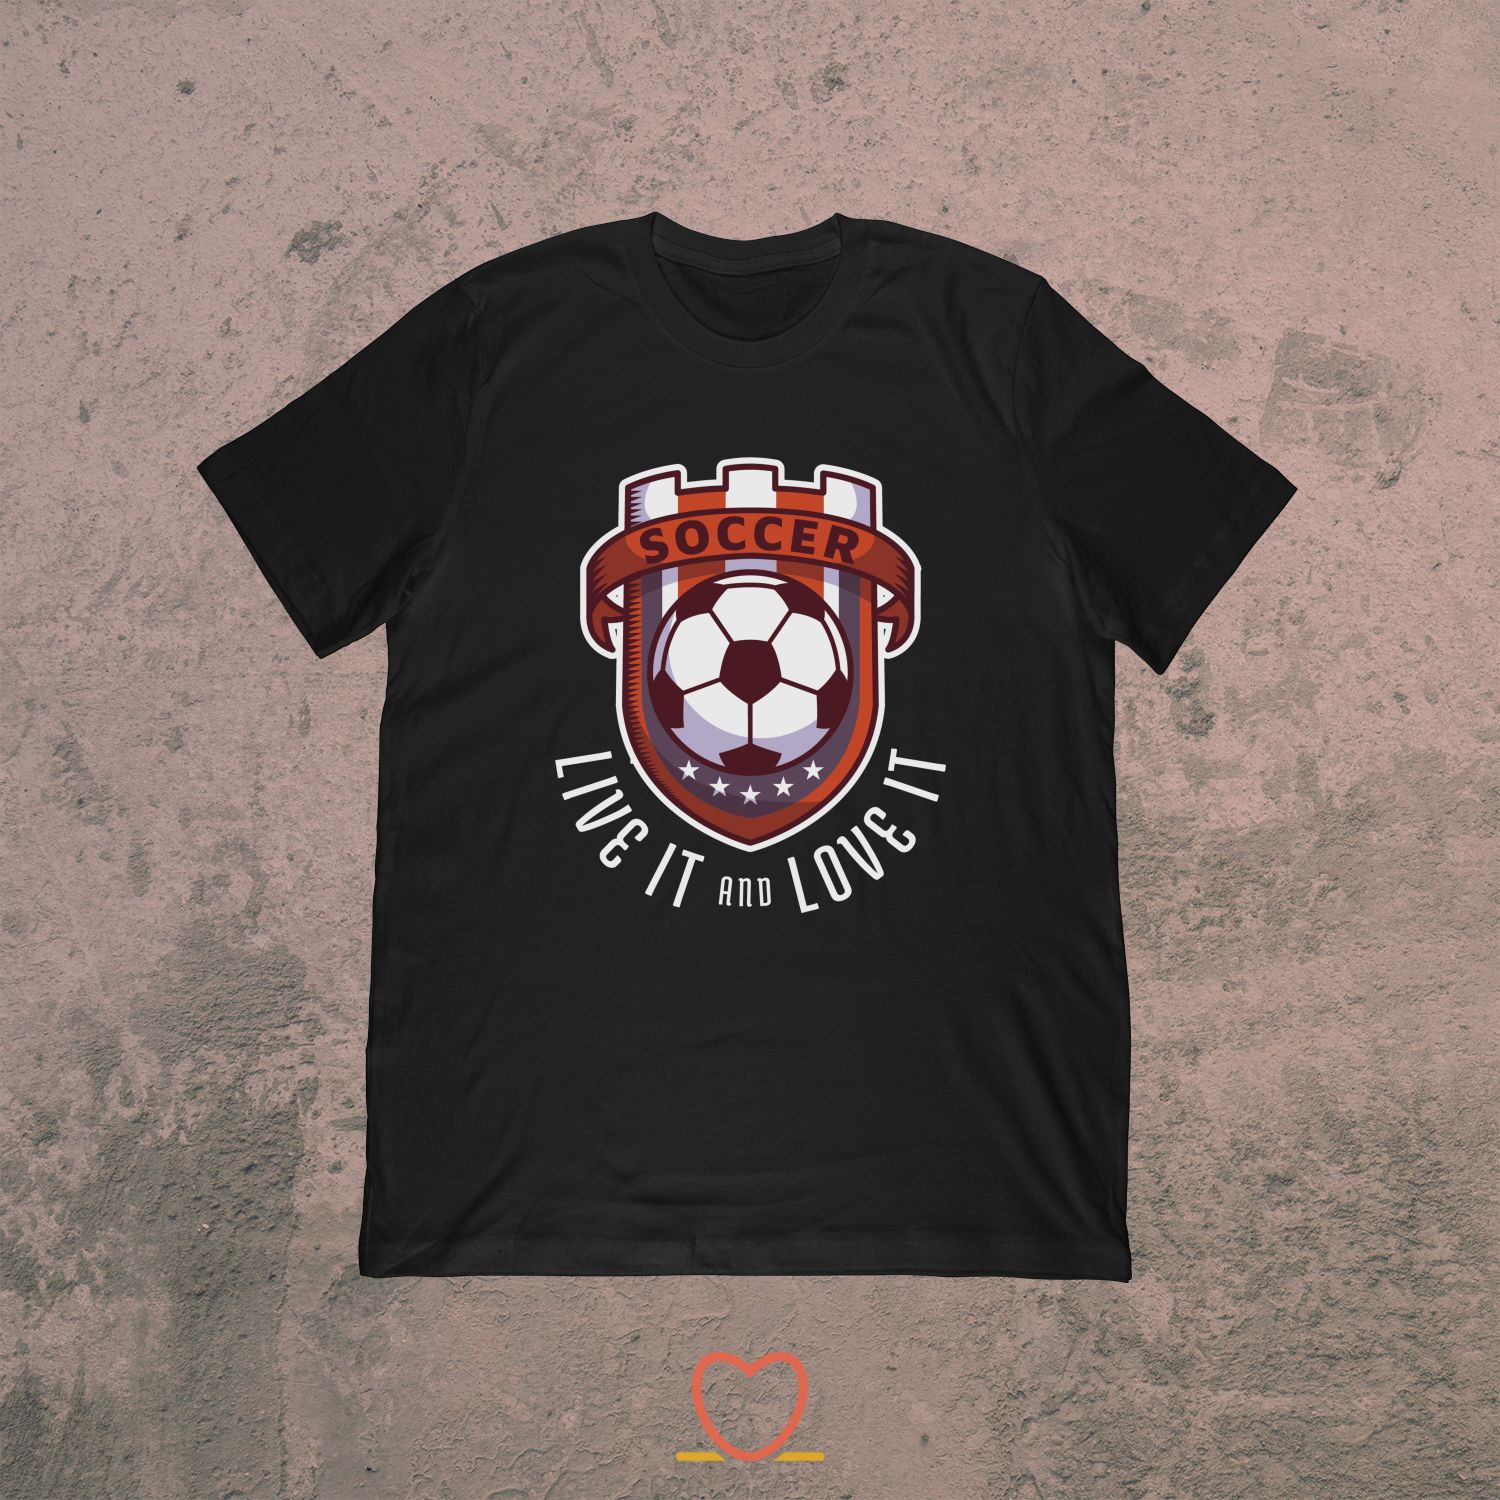 Soccer Live It And Love It – Soccer Life  Tee